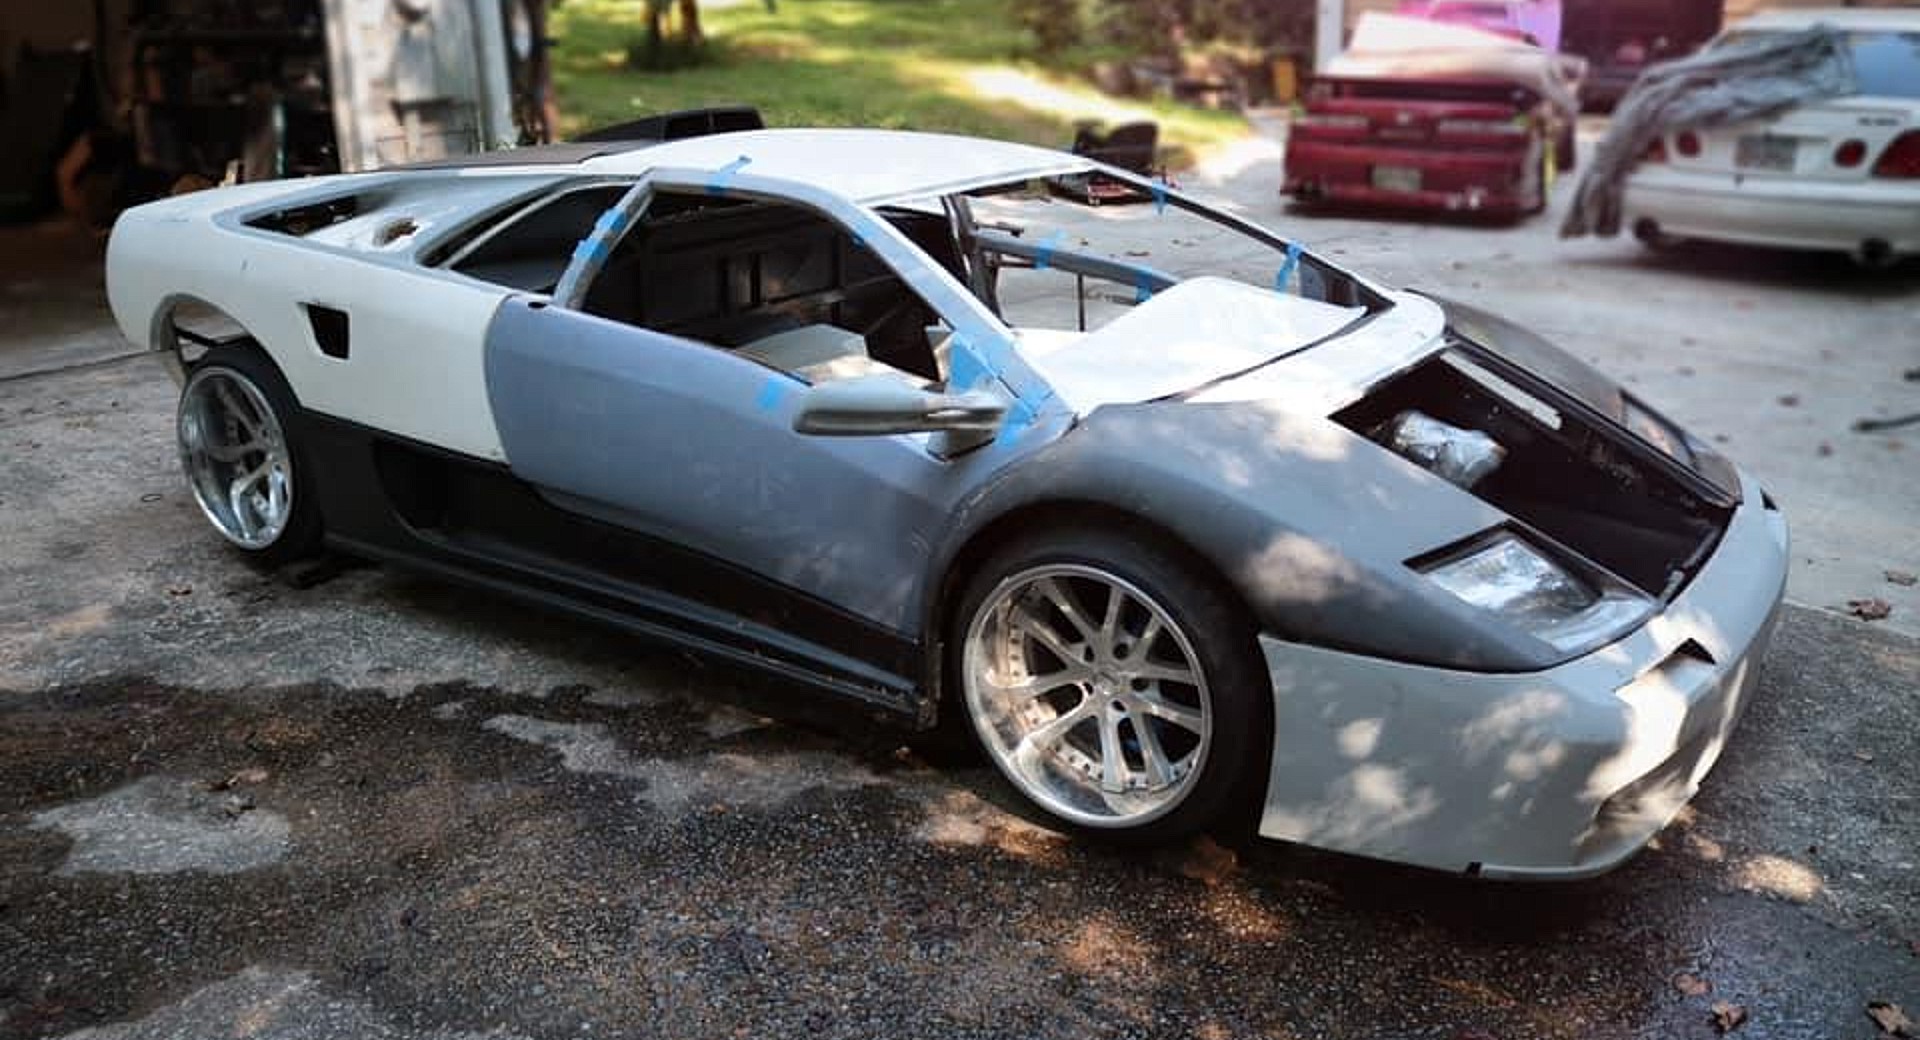 An Unfinished Lamborghini Diablo Replica Is One Way To Blow $30,000 |  Carscoops